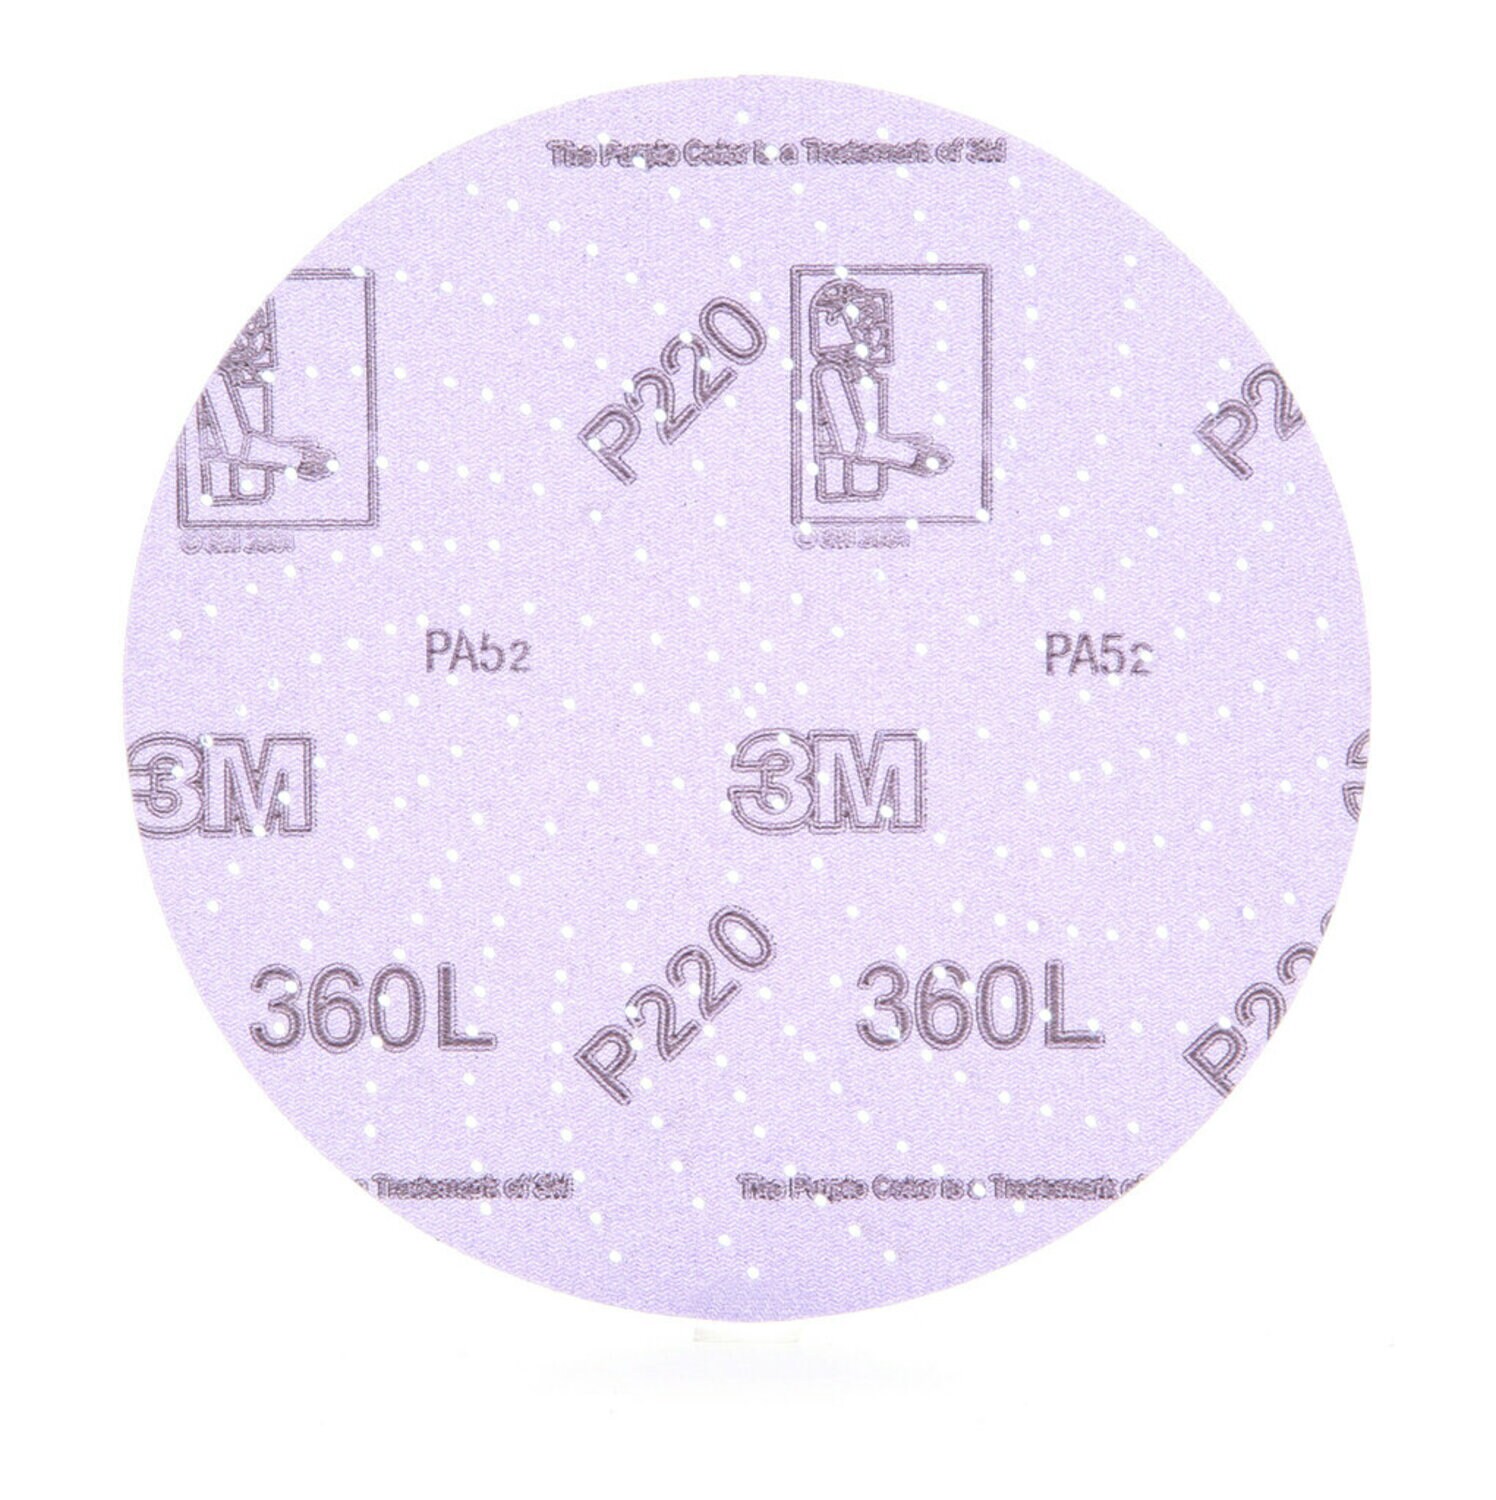 7100242232 - 3M Xtract Film Disc 360L, P220 3MIL, 6 in, Die 600LG, 100/Pack, 500
ea/Case, Shrink Wrapped